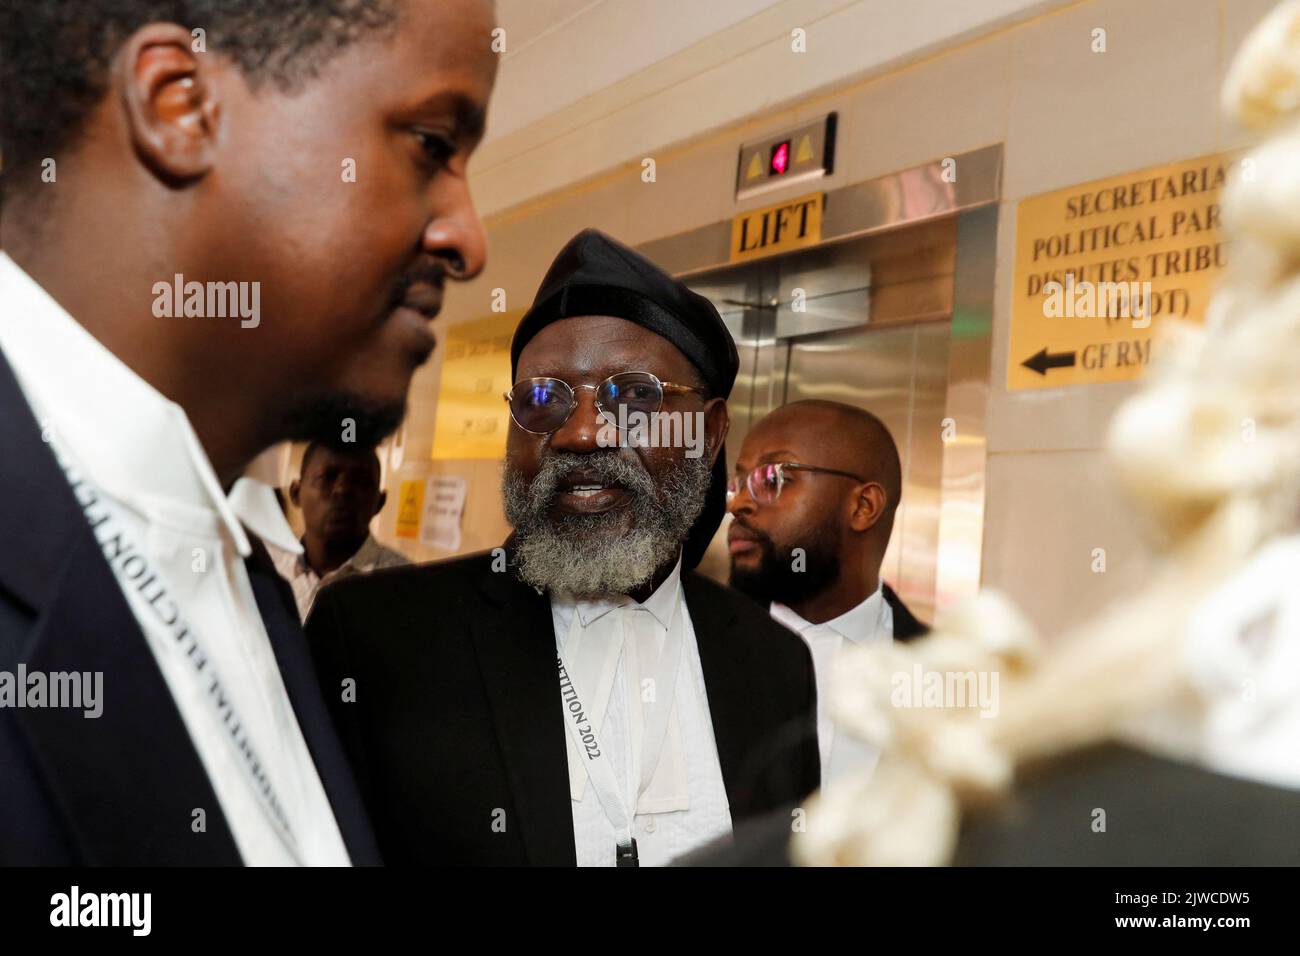 Former Kenyan presidential candidate George Wajackoyah arrives for the ruling on a petition seeking to invalidate the outcome of the recent presidential election, at the Supreme Court in Nairobi, Kenya September 5, 2022. REUTERS/Thomas Mukoya Stock Photo